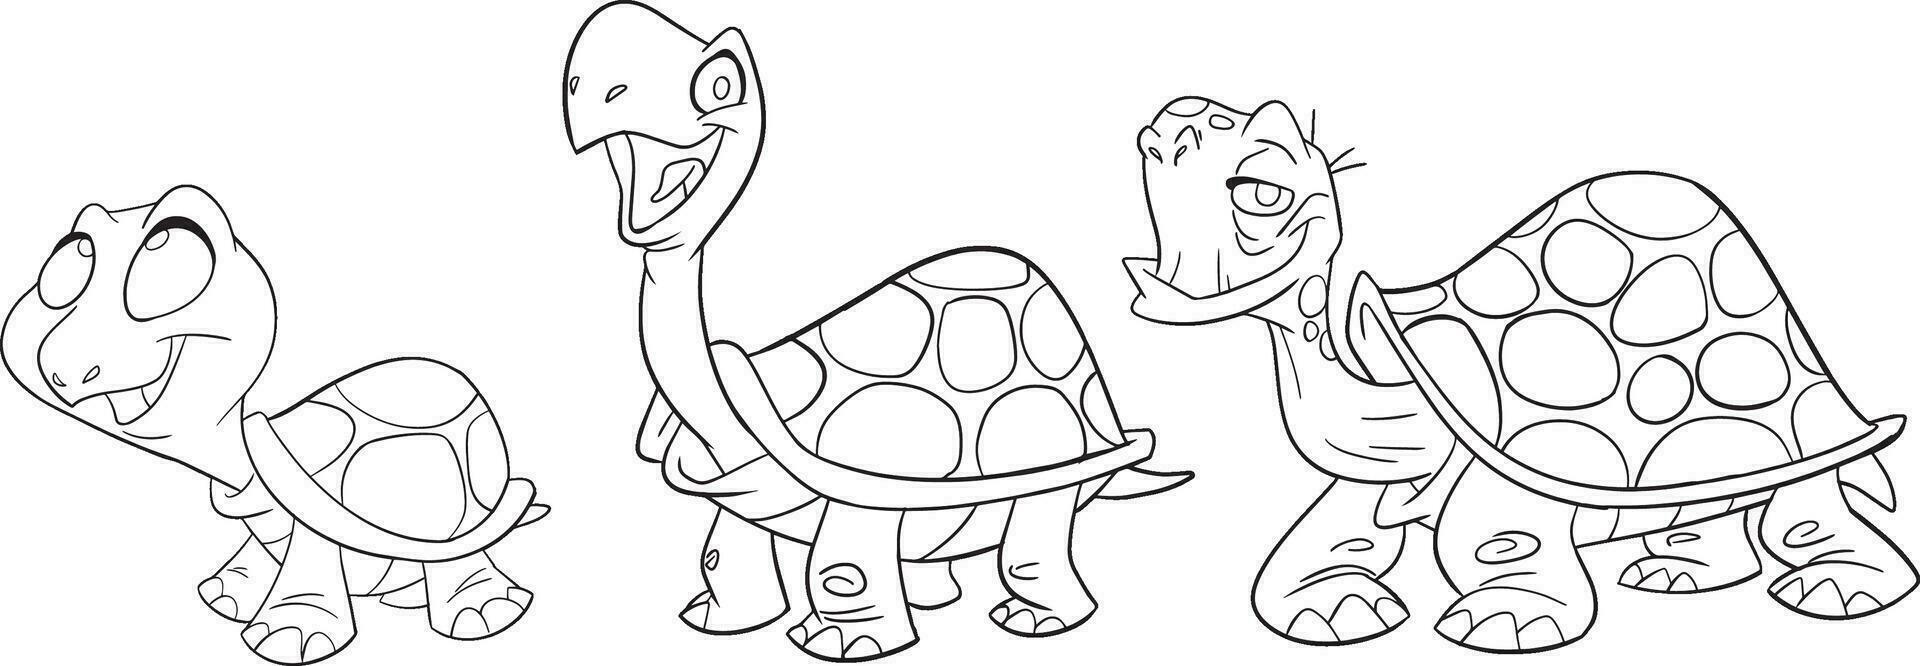 Sea animals group coloring page. Sea fish, octopus, dolphin, shark, whale, turtle and crab. Doodle-style. Outline vector illustration for coloring book. Vector leaf icon